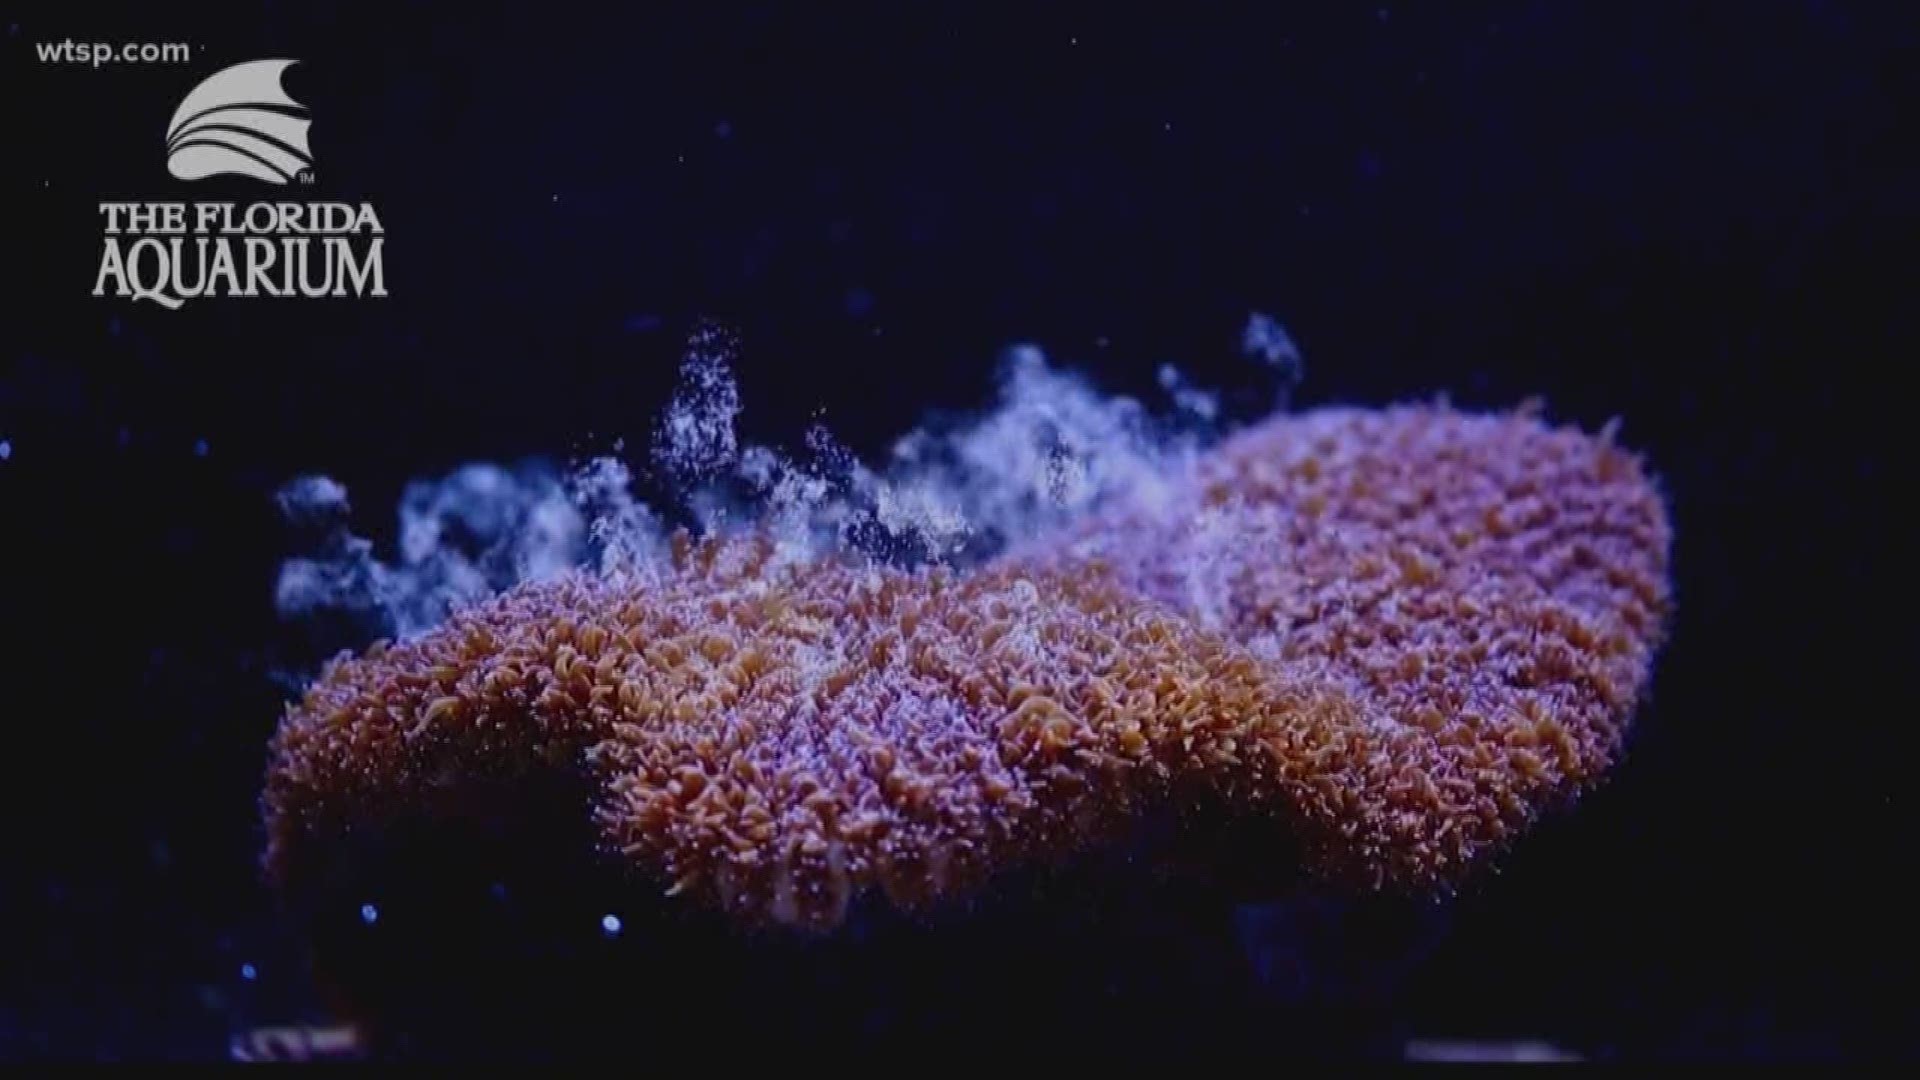 The Florida Aquarium says a recent scientific breakthrough could be the key to helping save Florida's coral reefs.

For the first time ever, scientists at the aquarium say endangered Atlantic pillar coral have spawned through laboratory techniques. The aquarium said the breakthrough happened this week at the Center for Conservation lab in Apollo Beach.